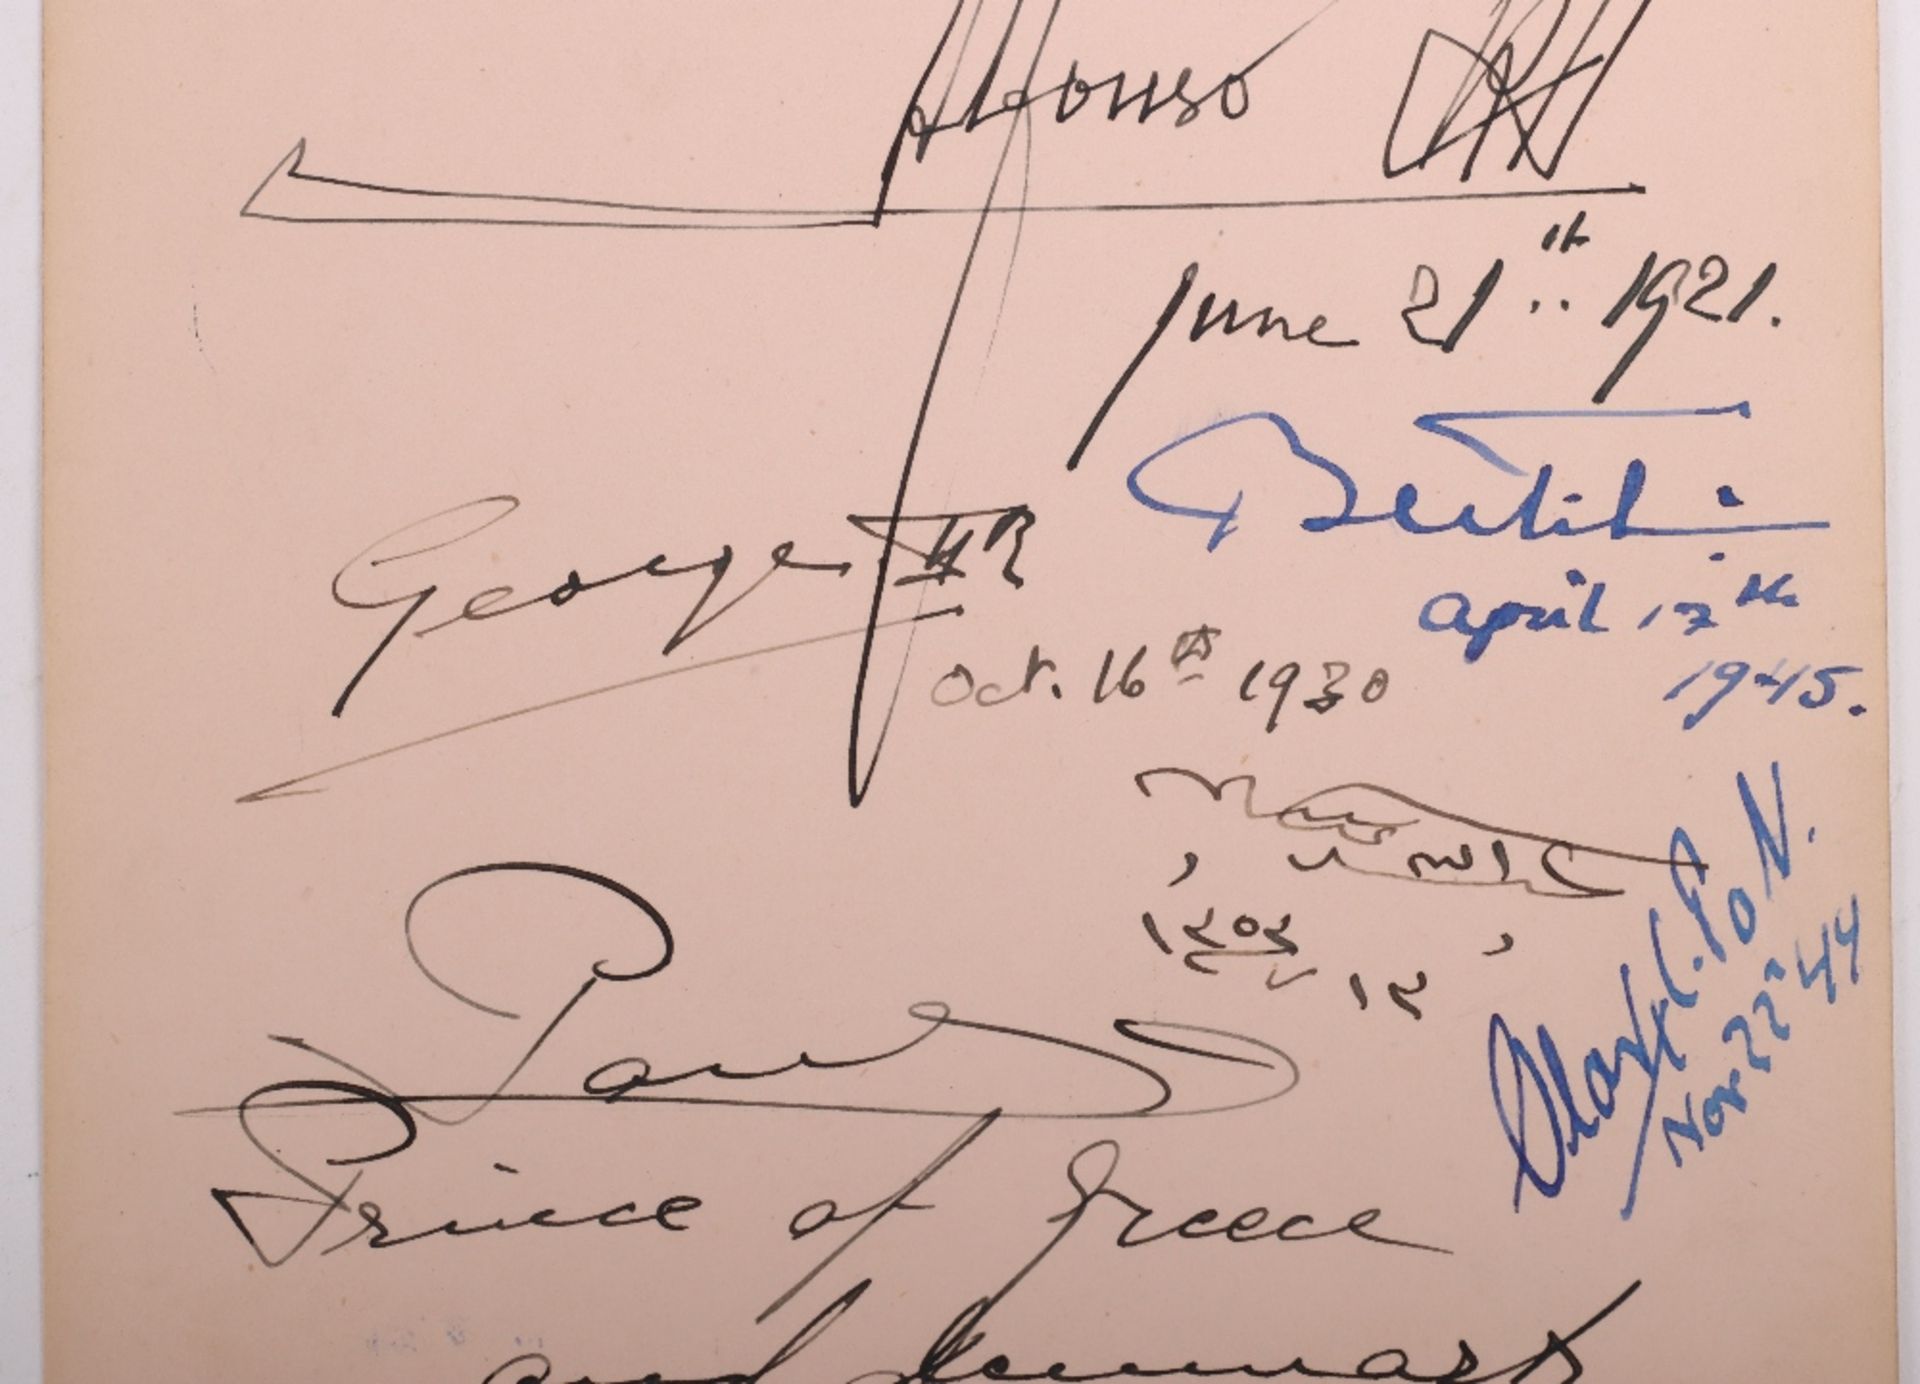 Rare Autograph Page Signed by Many Notorious World Leaders of the 20th Century - Image 3 of 5